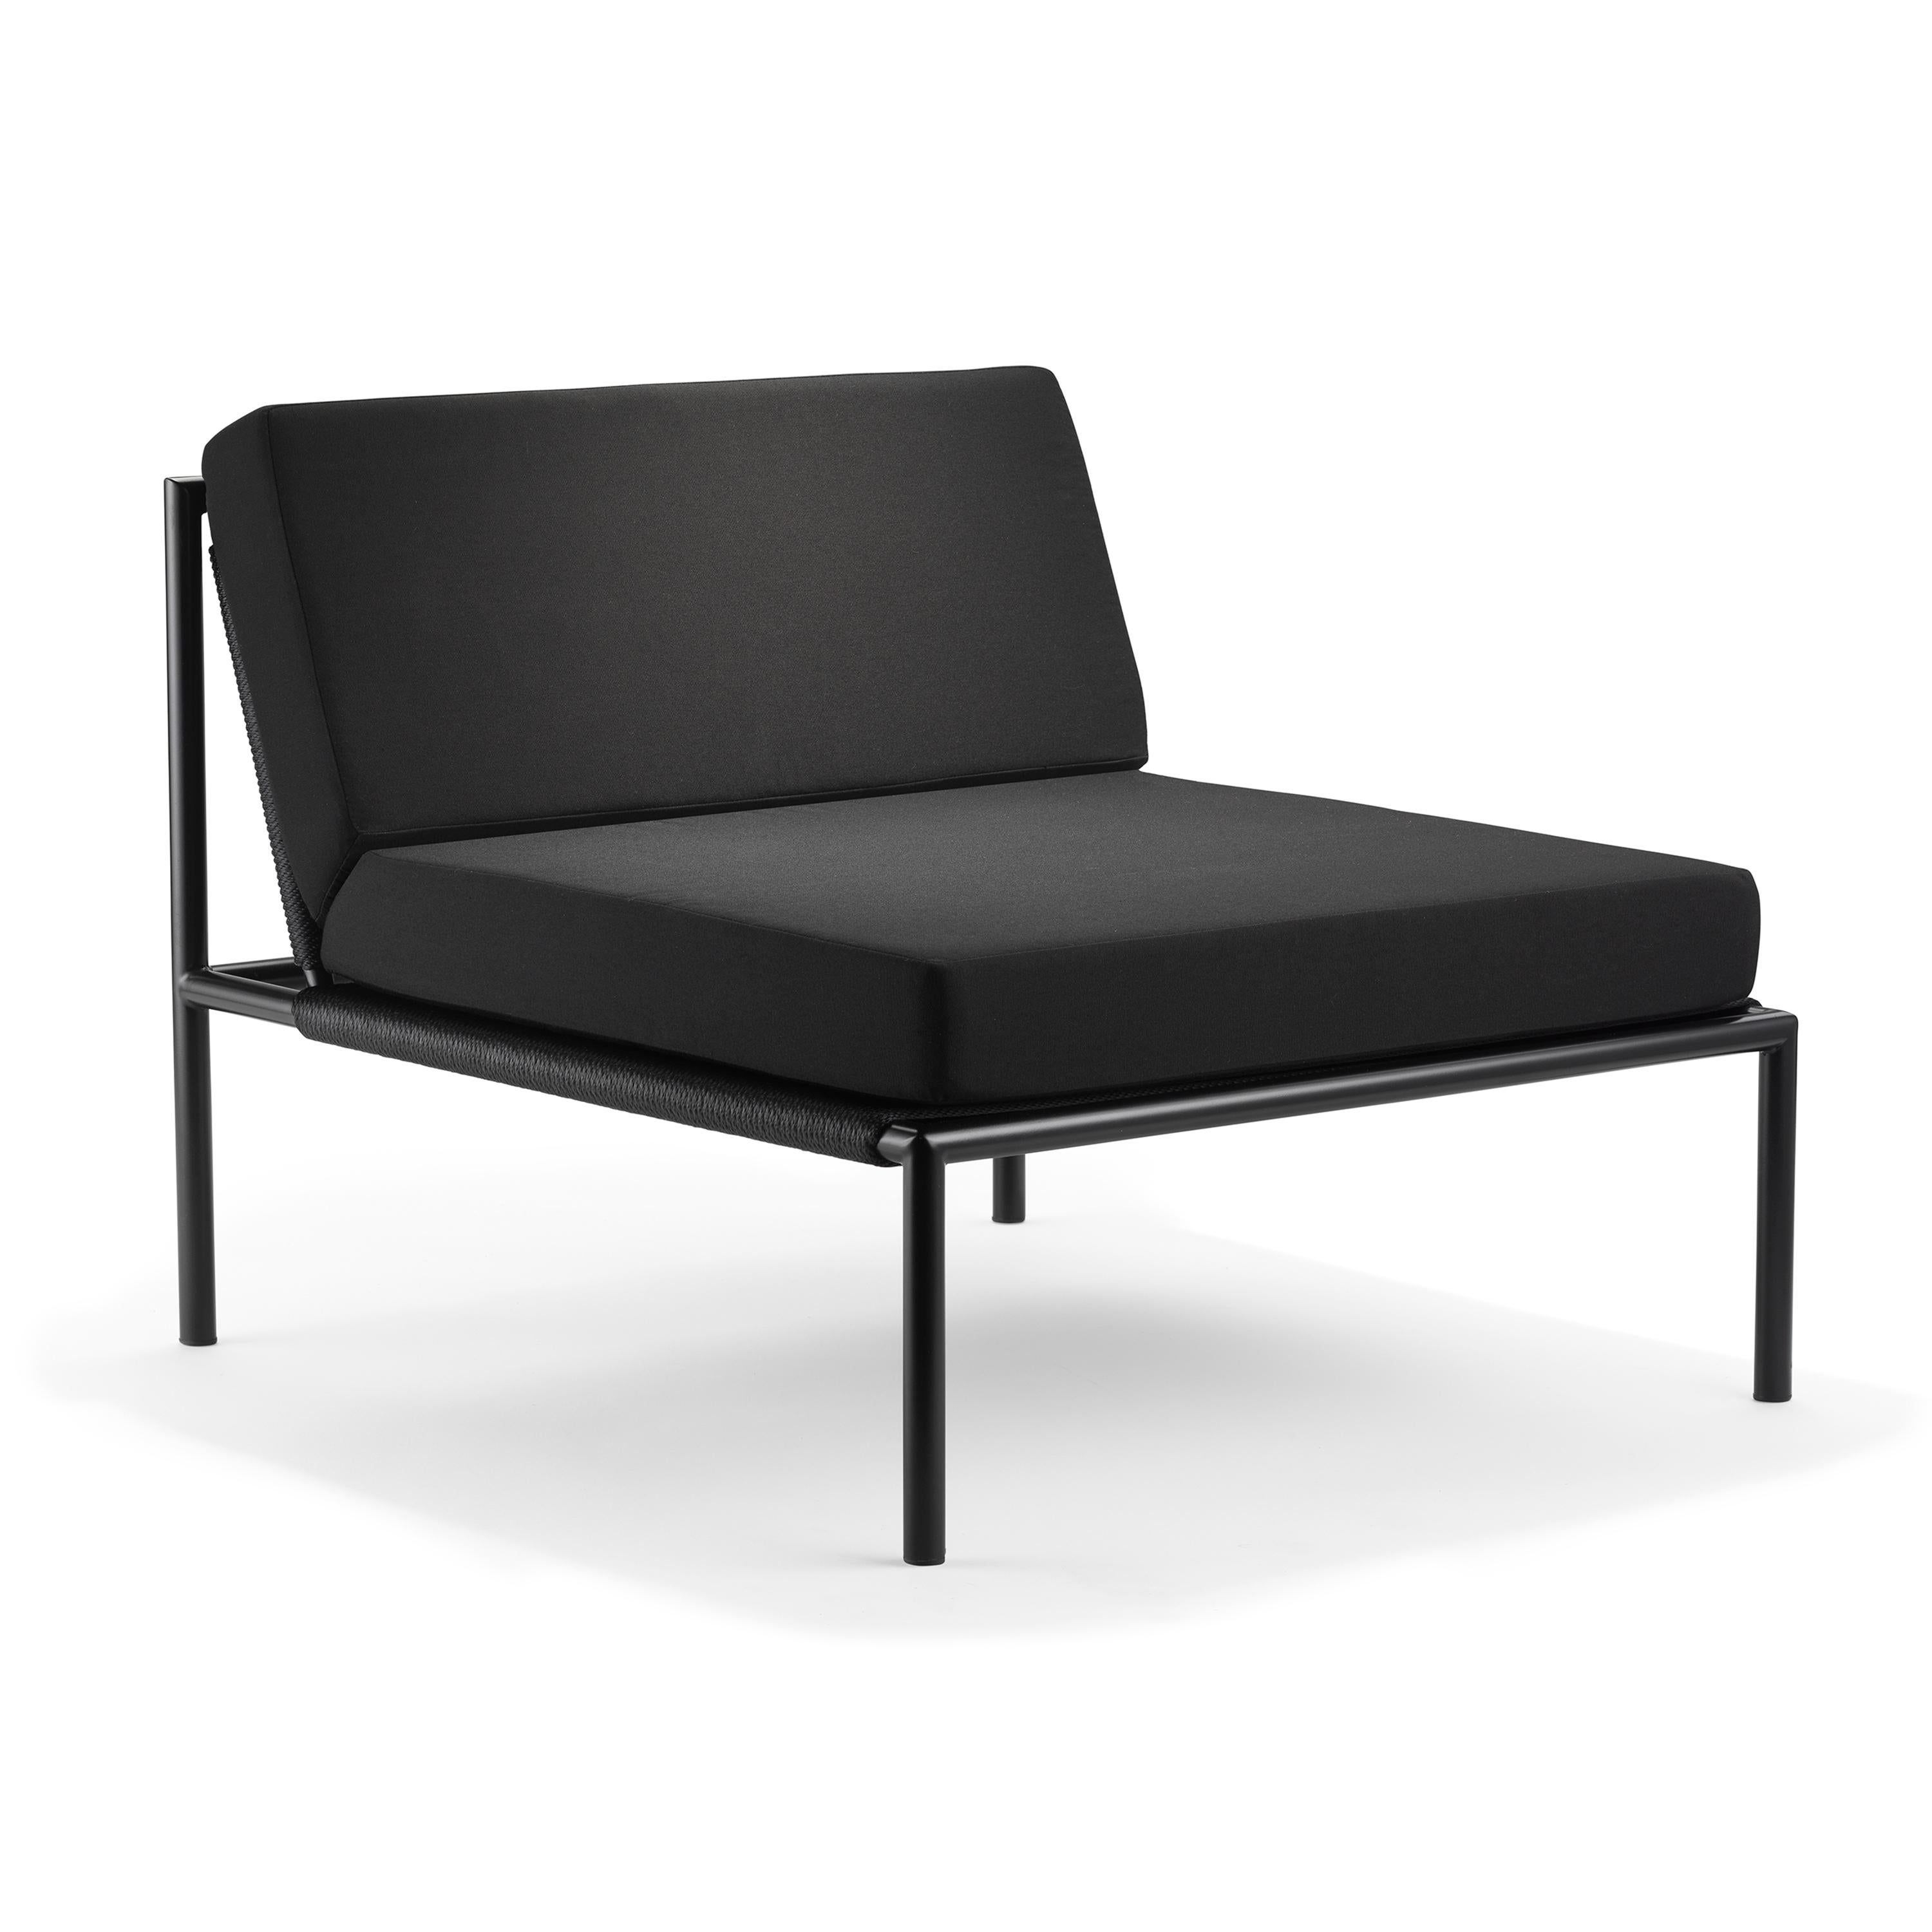 Ten10 1.2.3 Series chair / armless in semi gloss black powder coated stainless steel, nylon cord in black or white, and 4